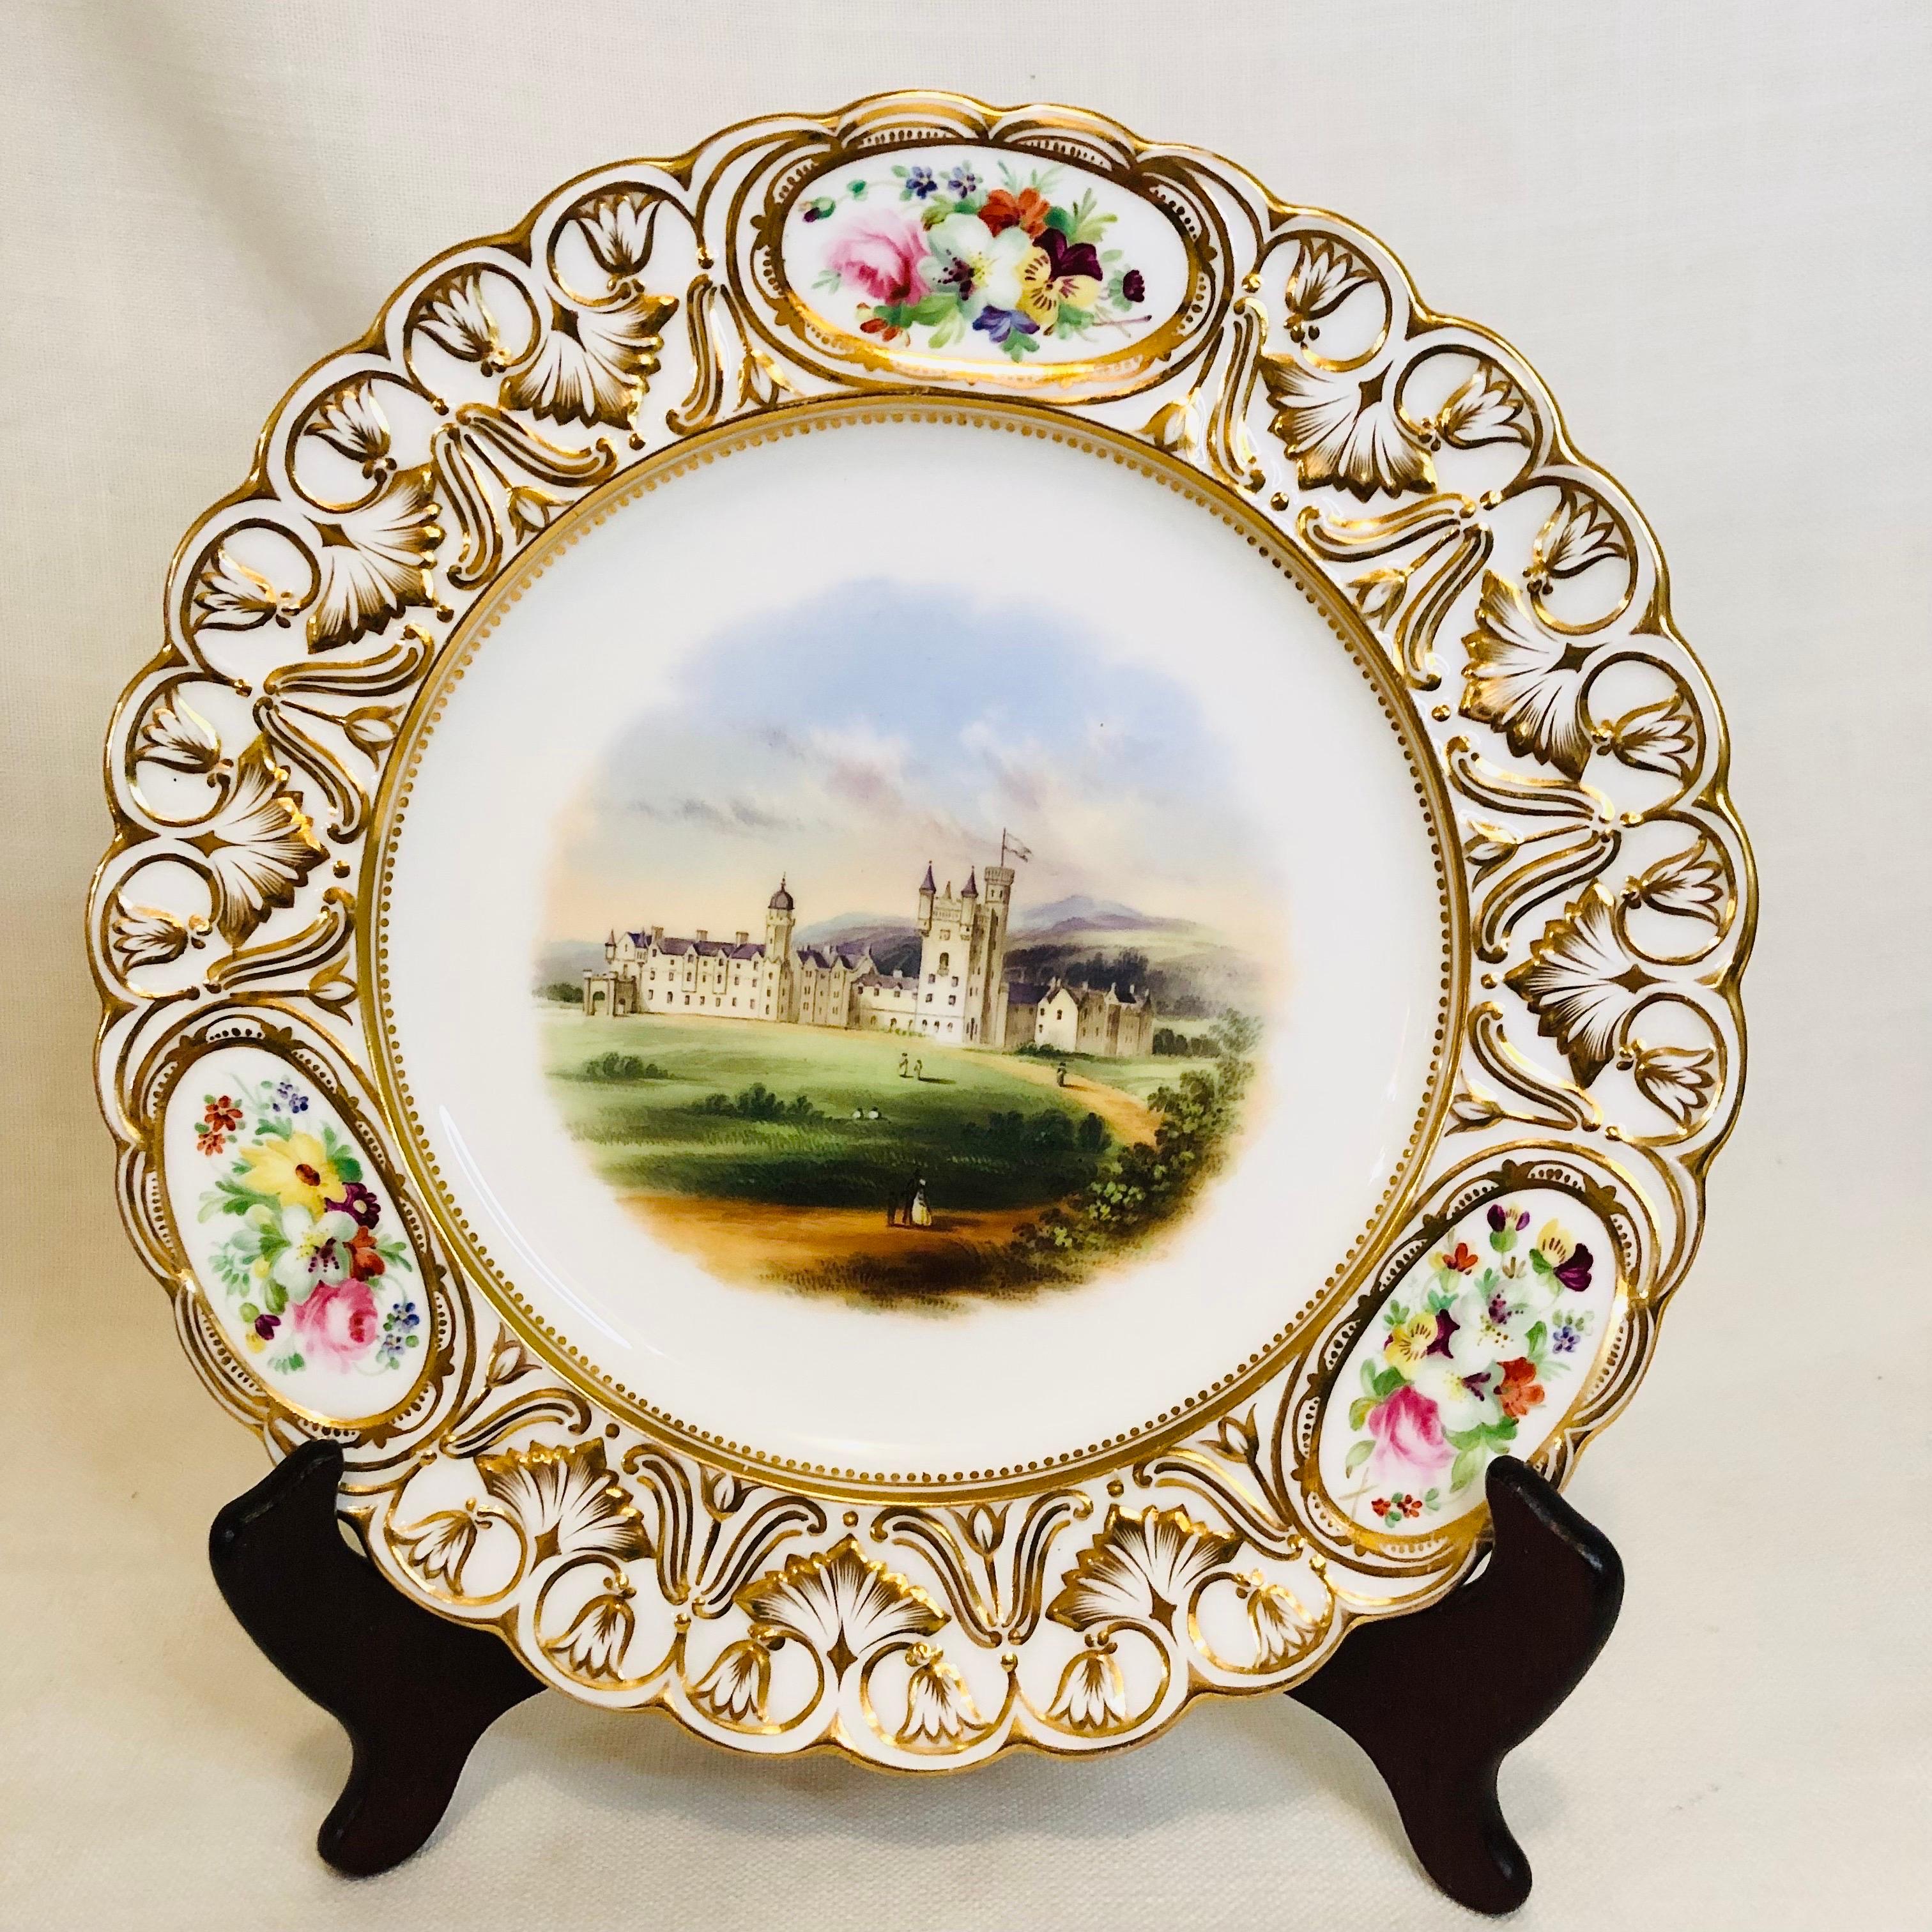 Set of 16 19th Century Coalport Plates Each Hand-Painted with Magnificent Scenes In Good Condition For Sale In Boston, MA